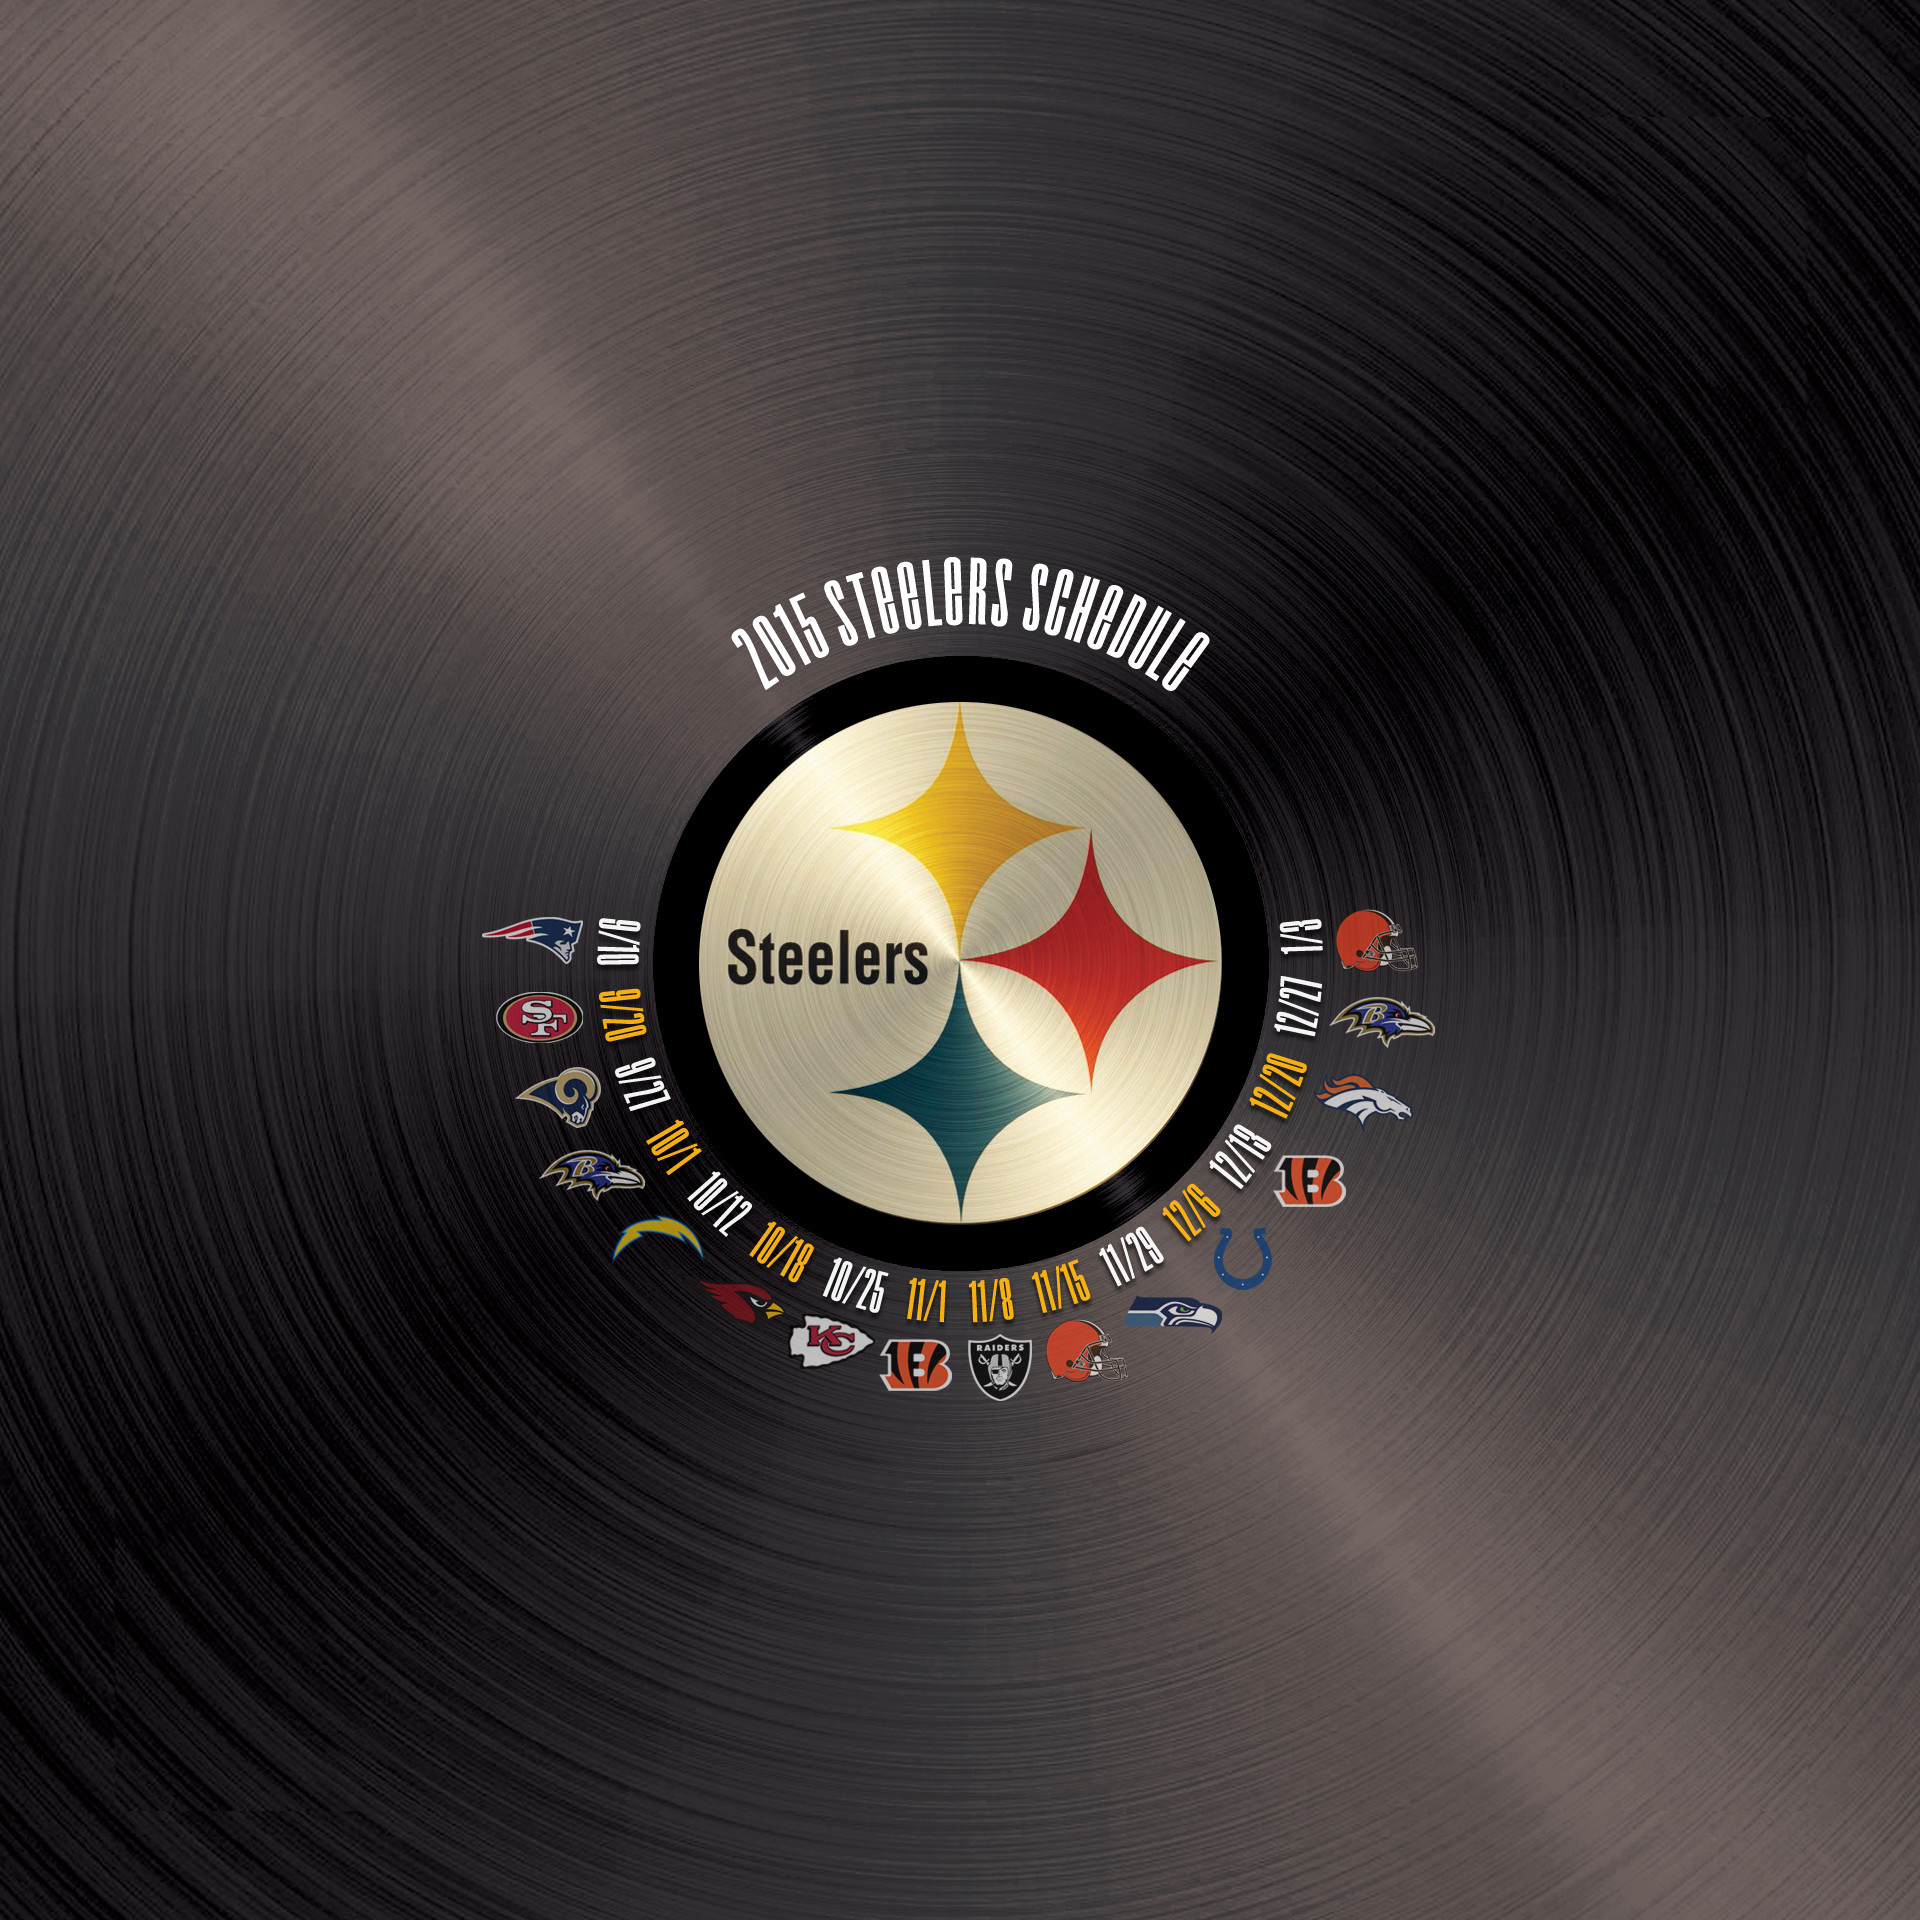 1920x1920 Get the Steelers Schedule on all your devices | Epic Car Wallpapers |  Pinterest | Steelers schedule